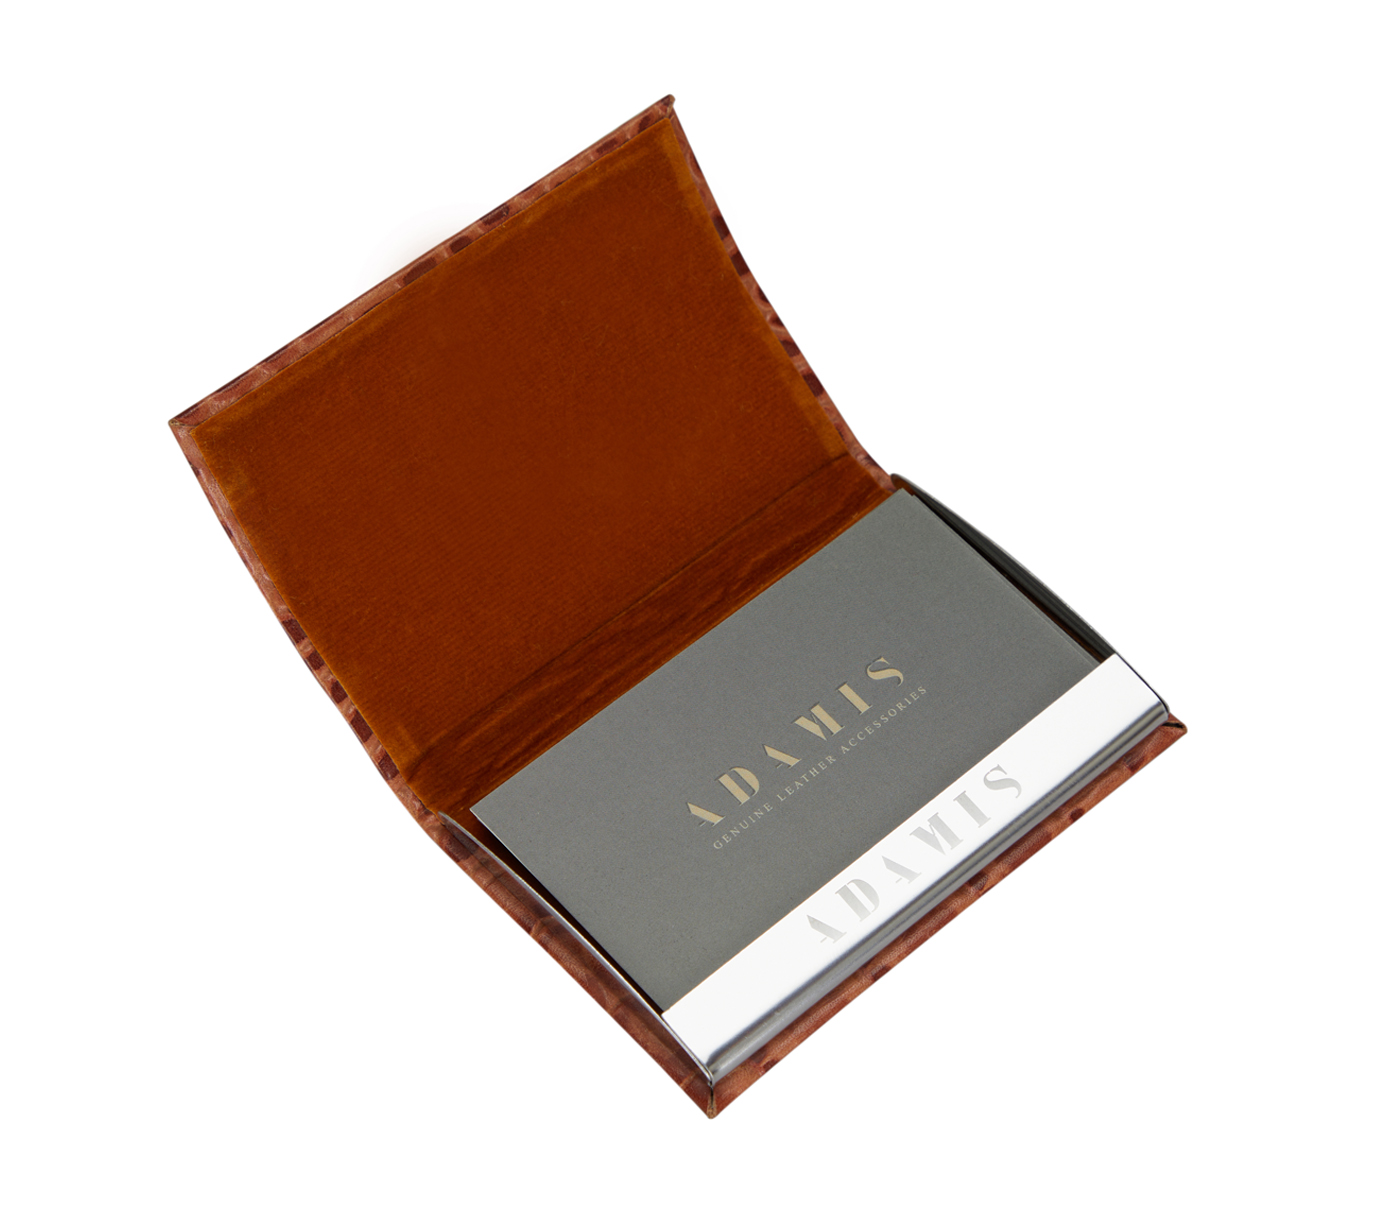 W170--Metal Body Credit, Visting Card Case Bounded In Genuine Leather - Tan